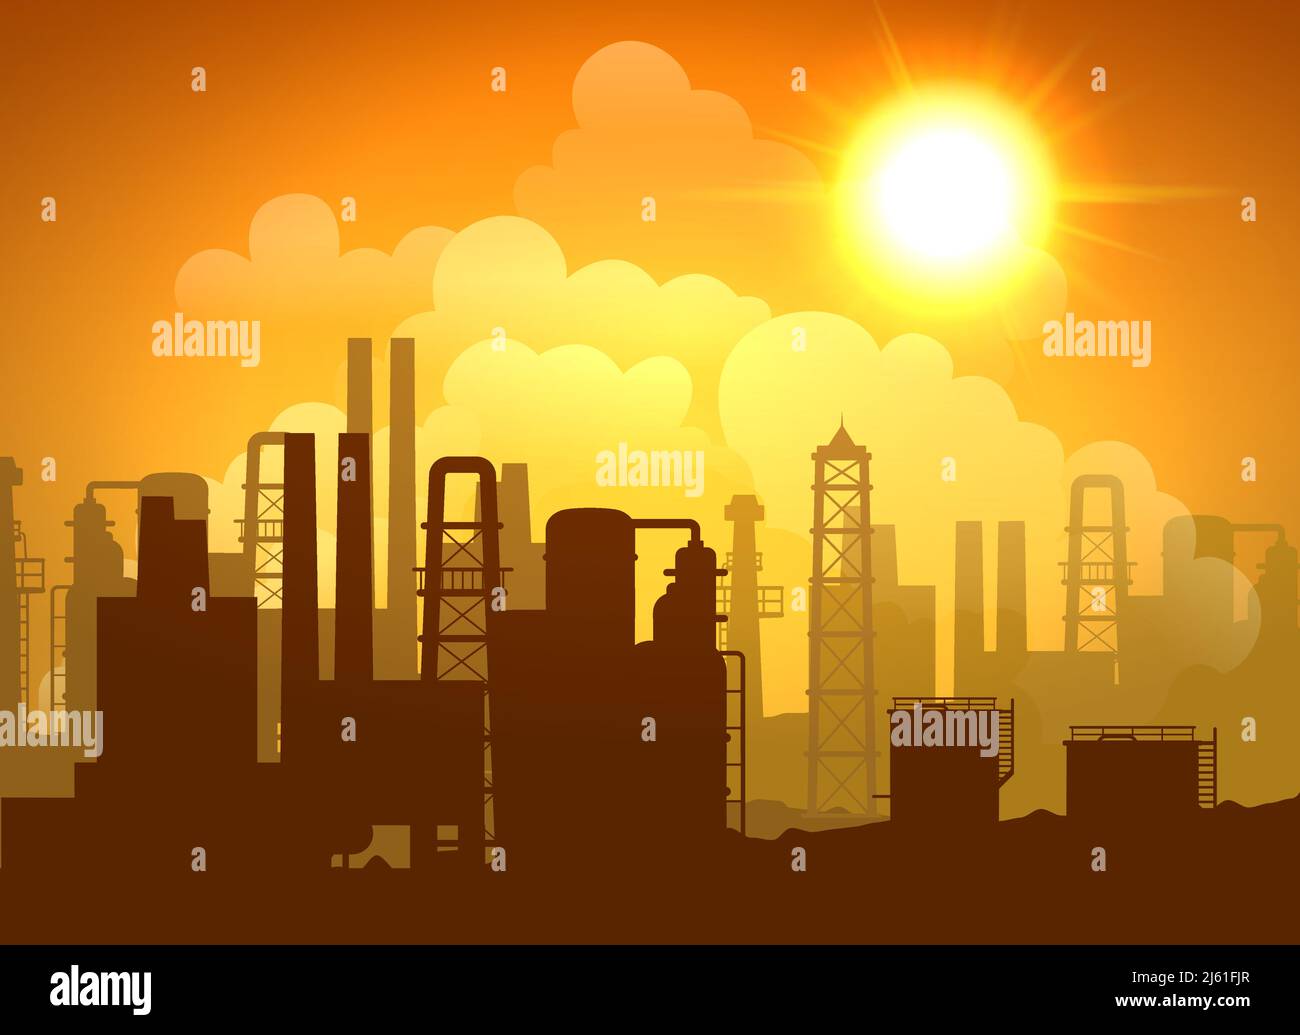 Oil refinery poster with towers pipes and tanks at sunrise or sunset vector illustration Stock Vector